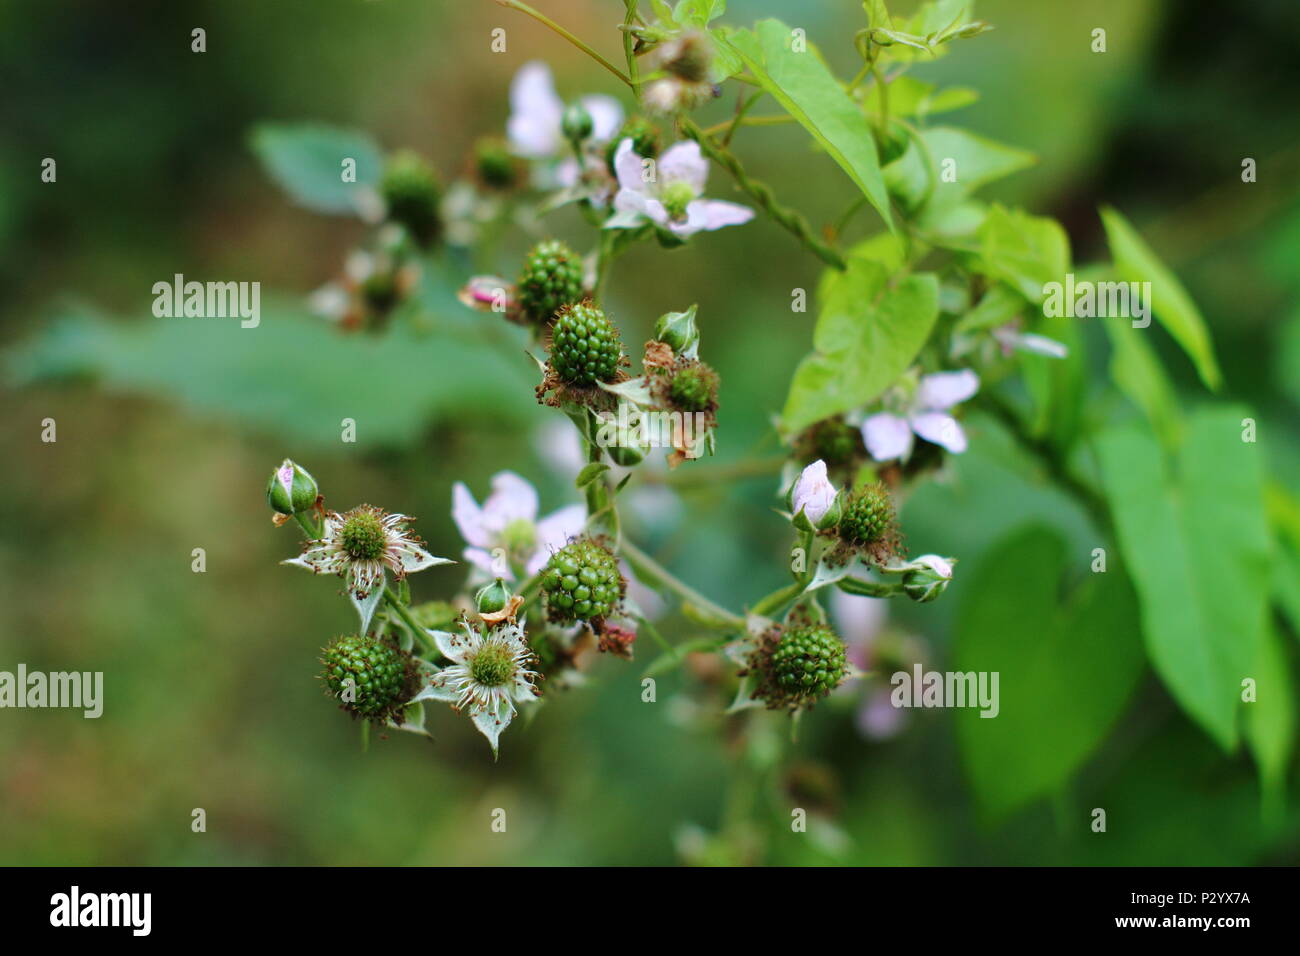 Blackberry branch in forest. Branch with green  riping bramble berriesand blossom. Stock Photo